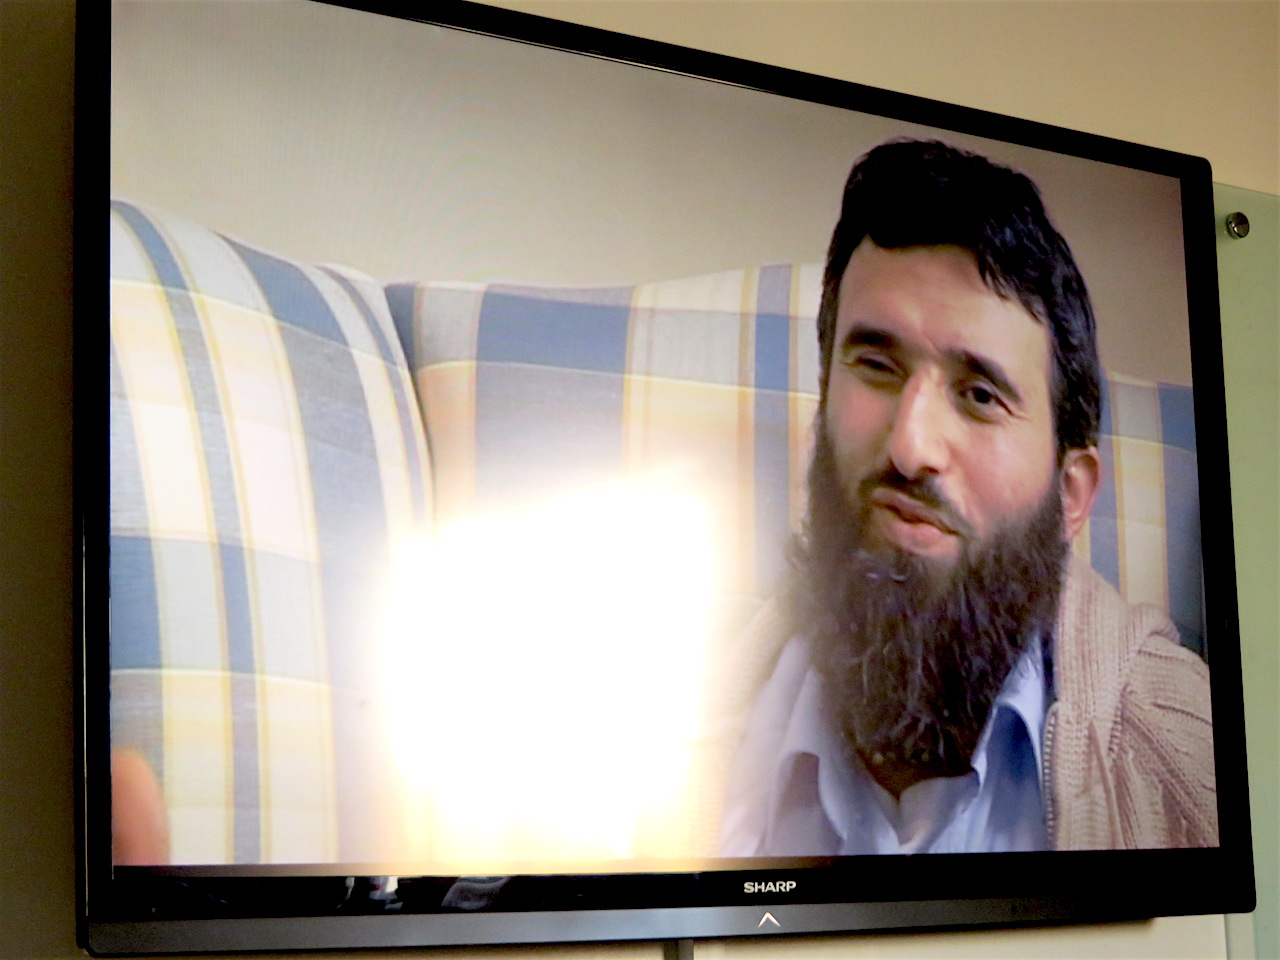 A screenshot of former Guantanamo prisoner Omar Deghayes in 'Outside the Law: Stories from Guantanamo', shown at the University of Westminster on November 17, 2017 (Photo: Andy Worthington).